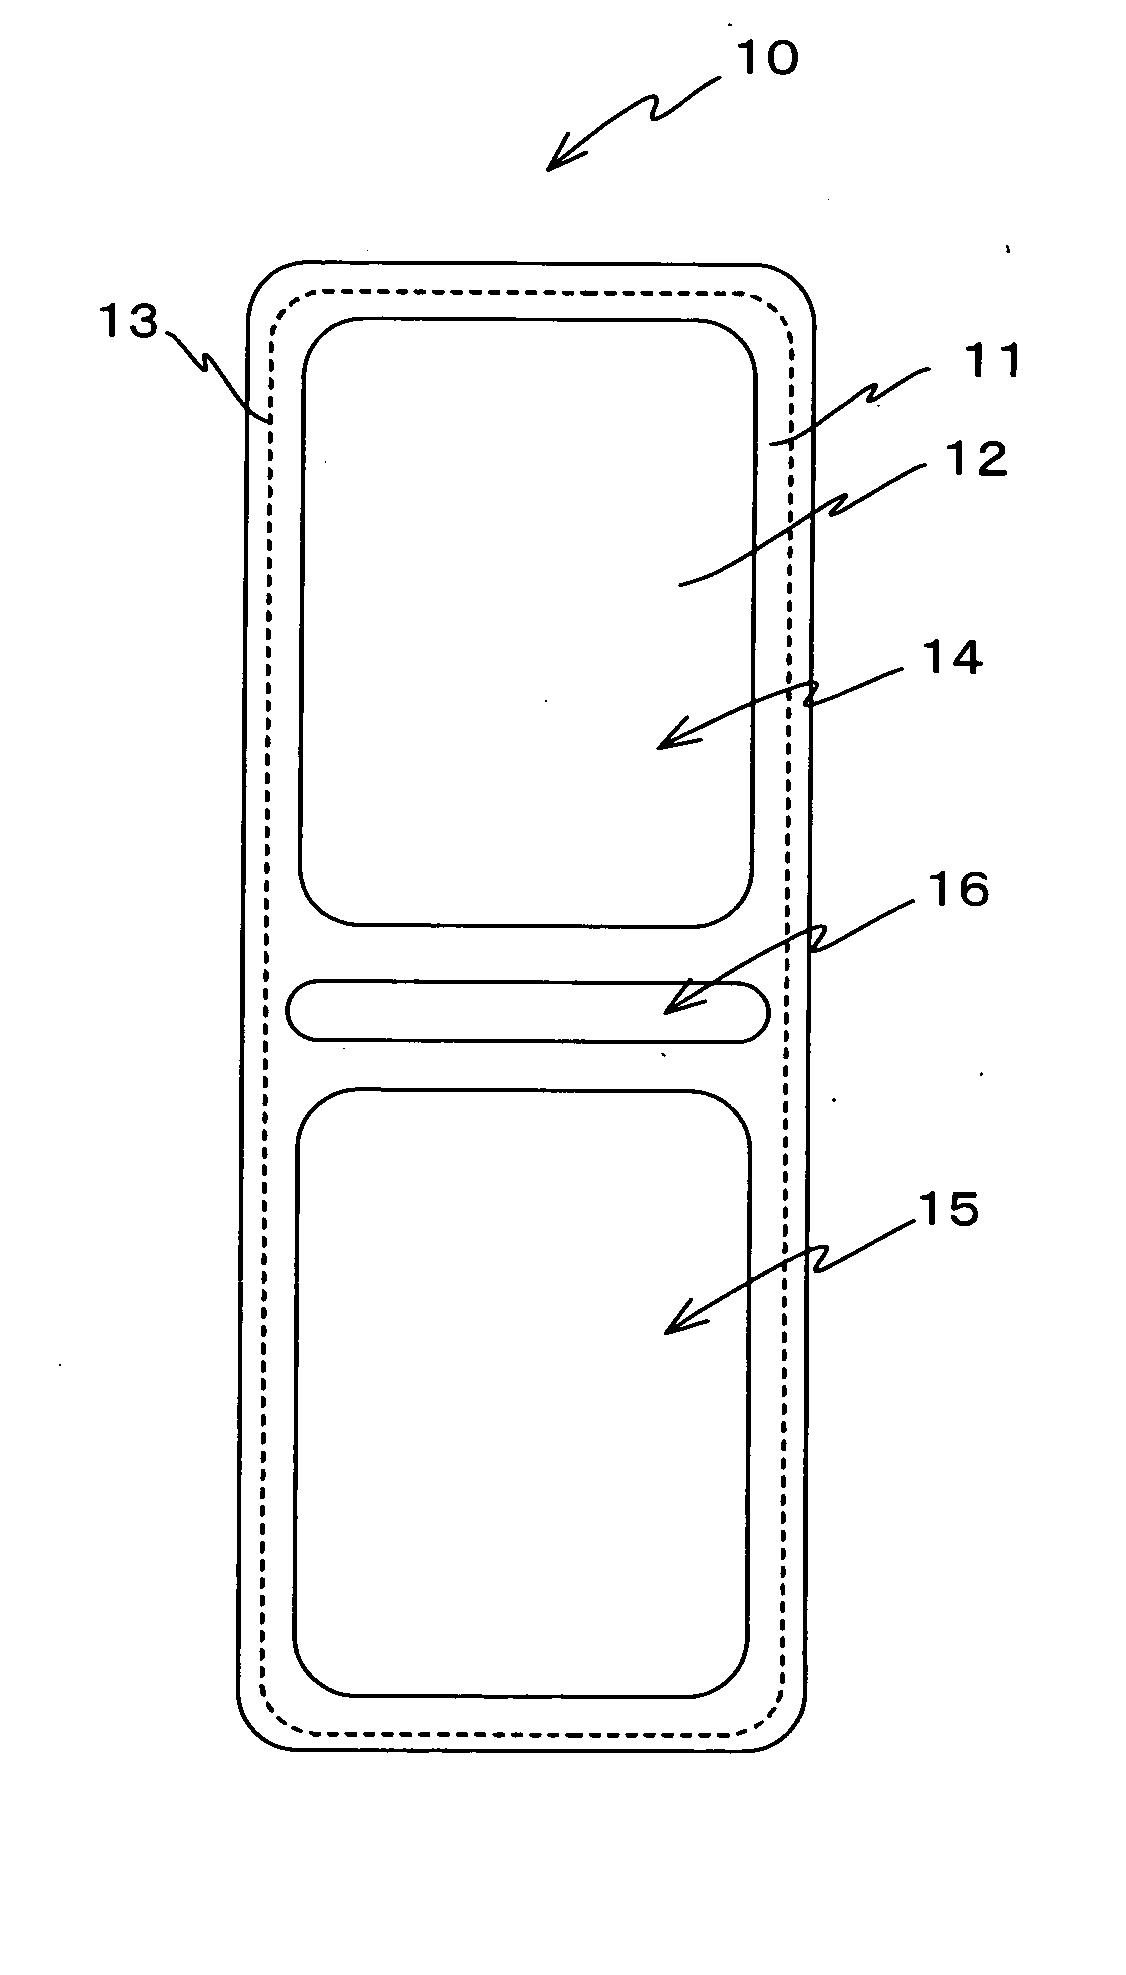 Cover for mobile communication terminal, and mobile communication terminal